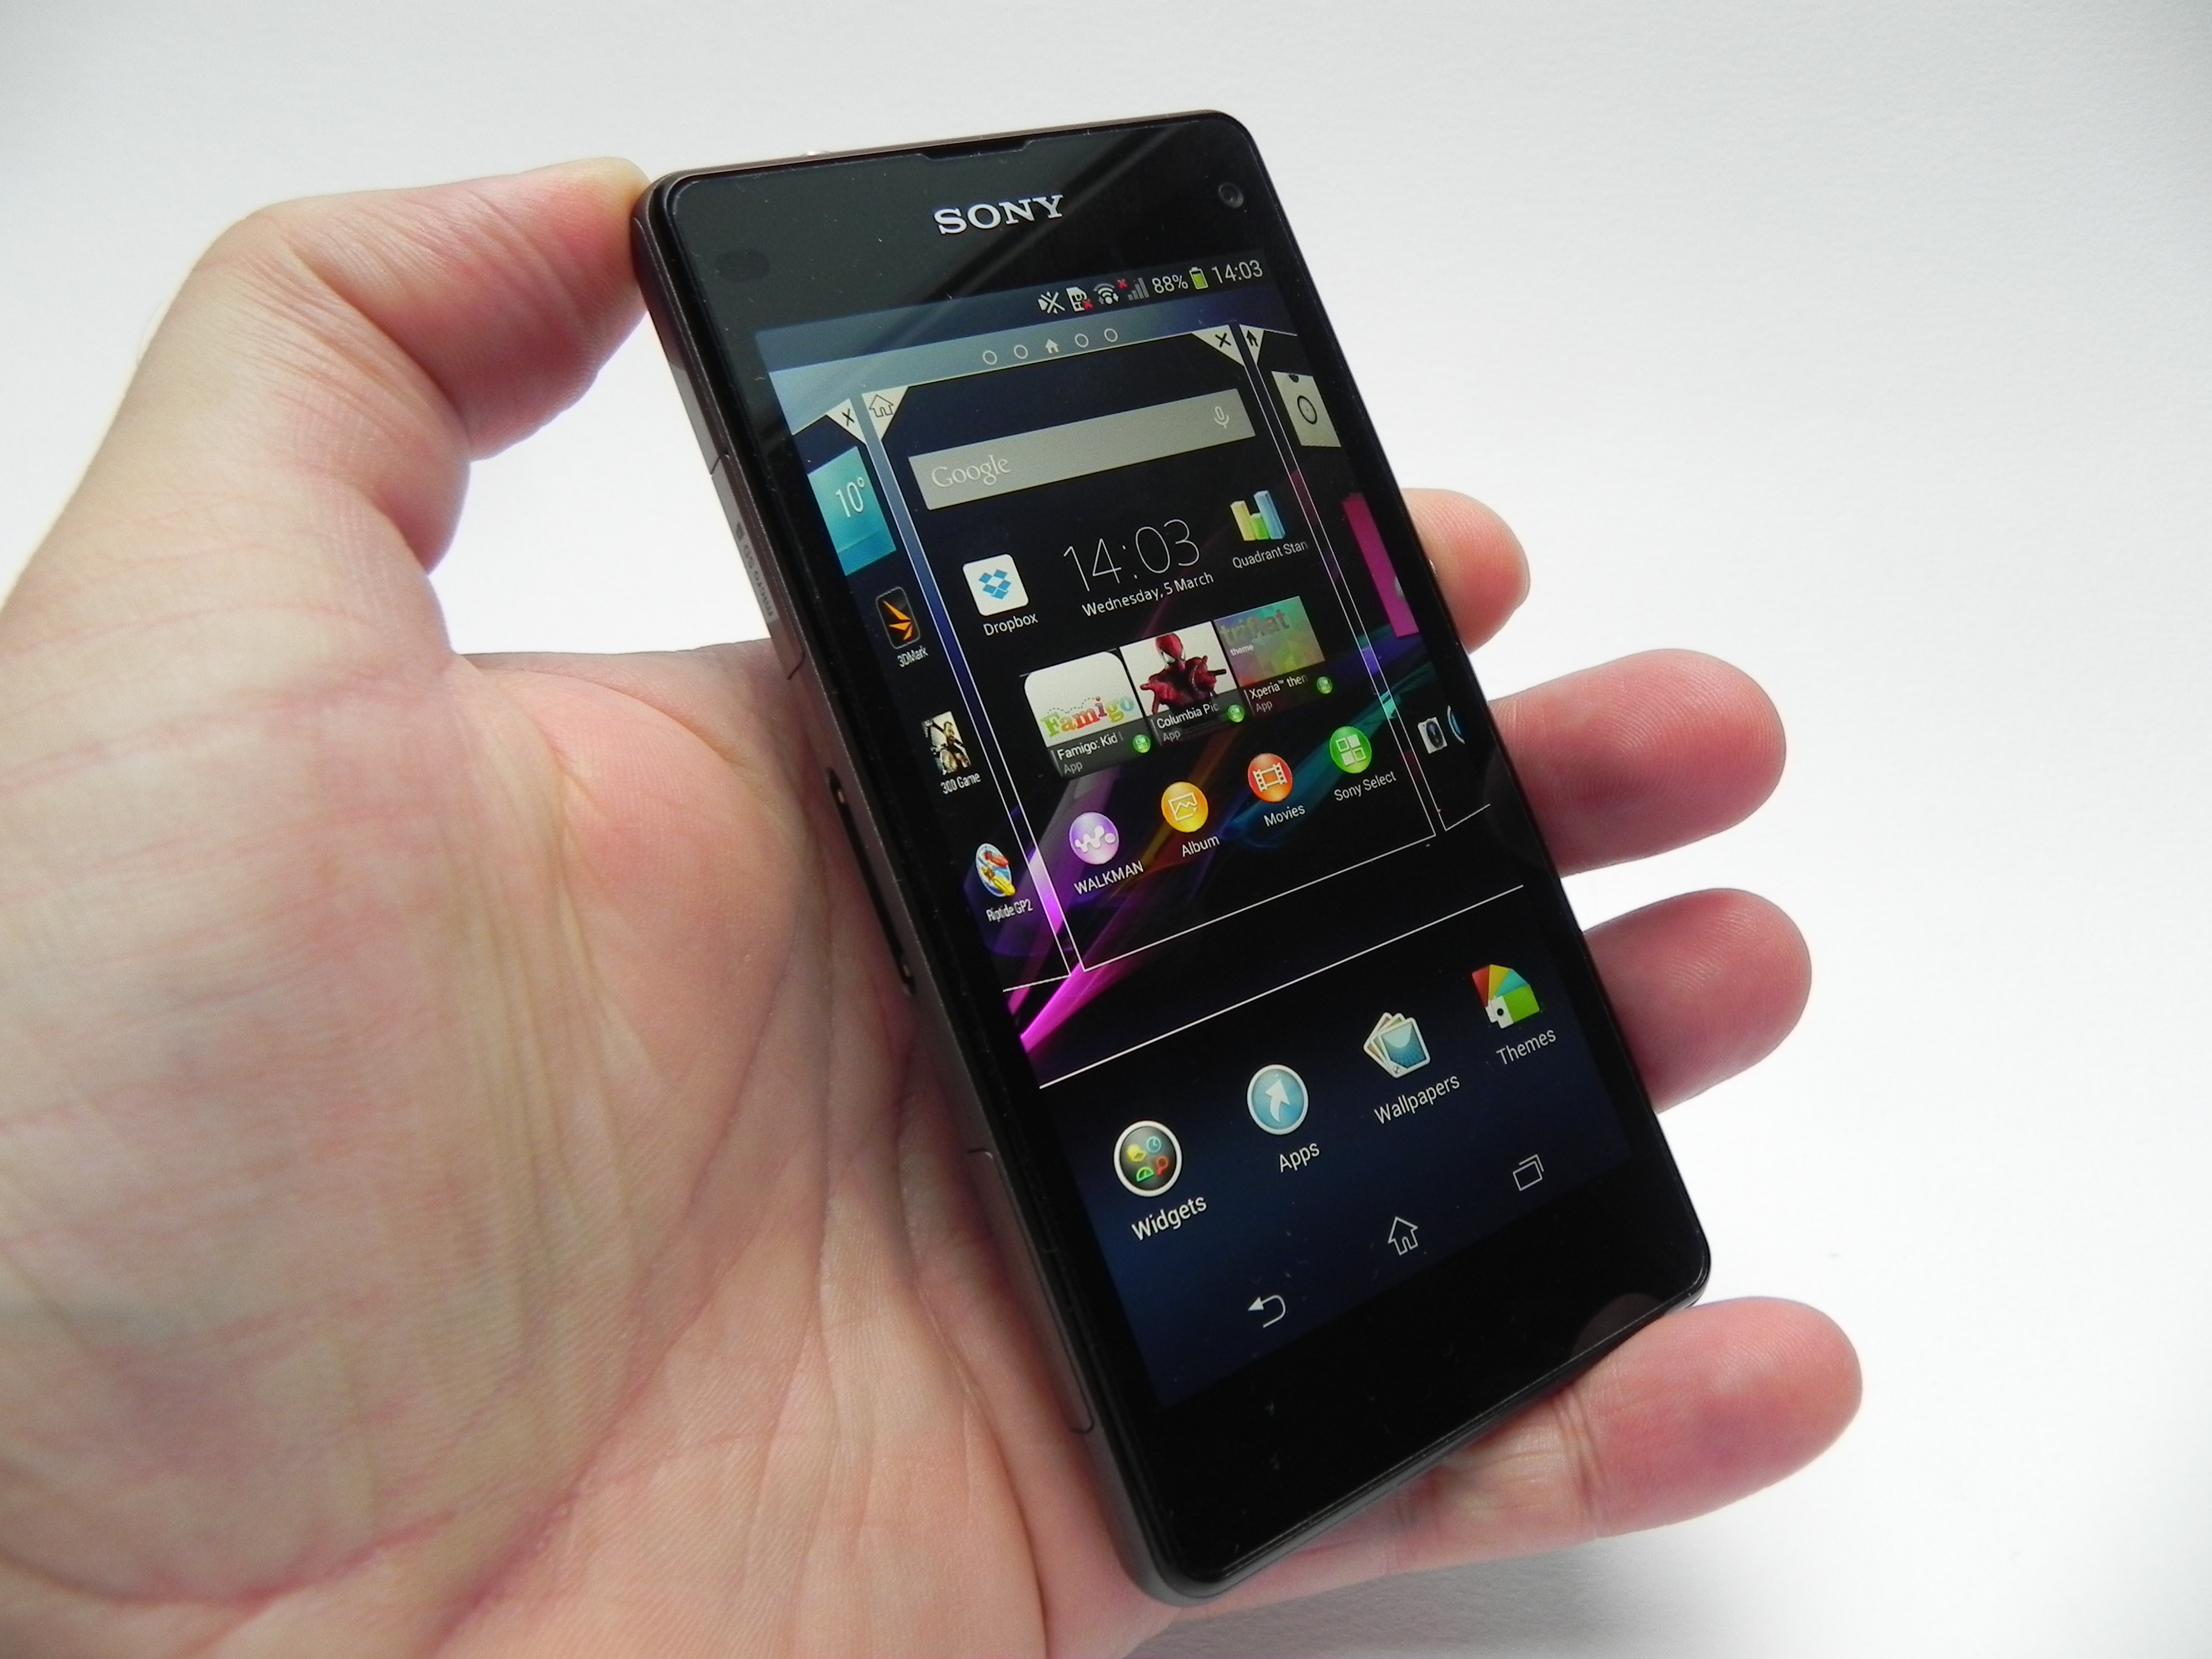 Xperia Z1 Compact Review: Smaller Xperia is Better Than the Big Brother in a Regards (Video) | GSMDome.com